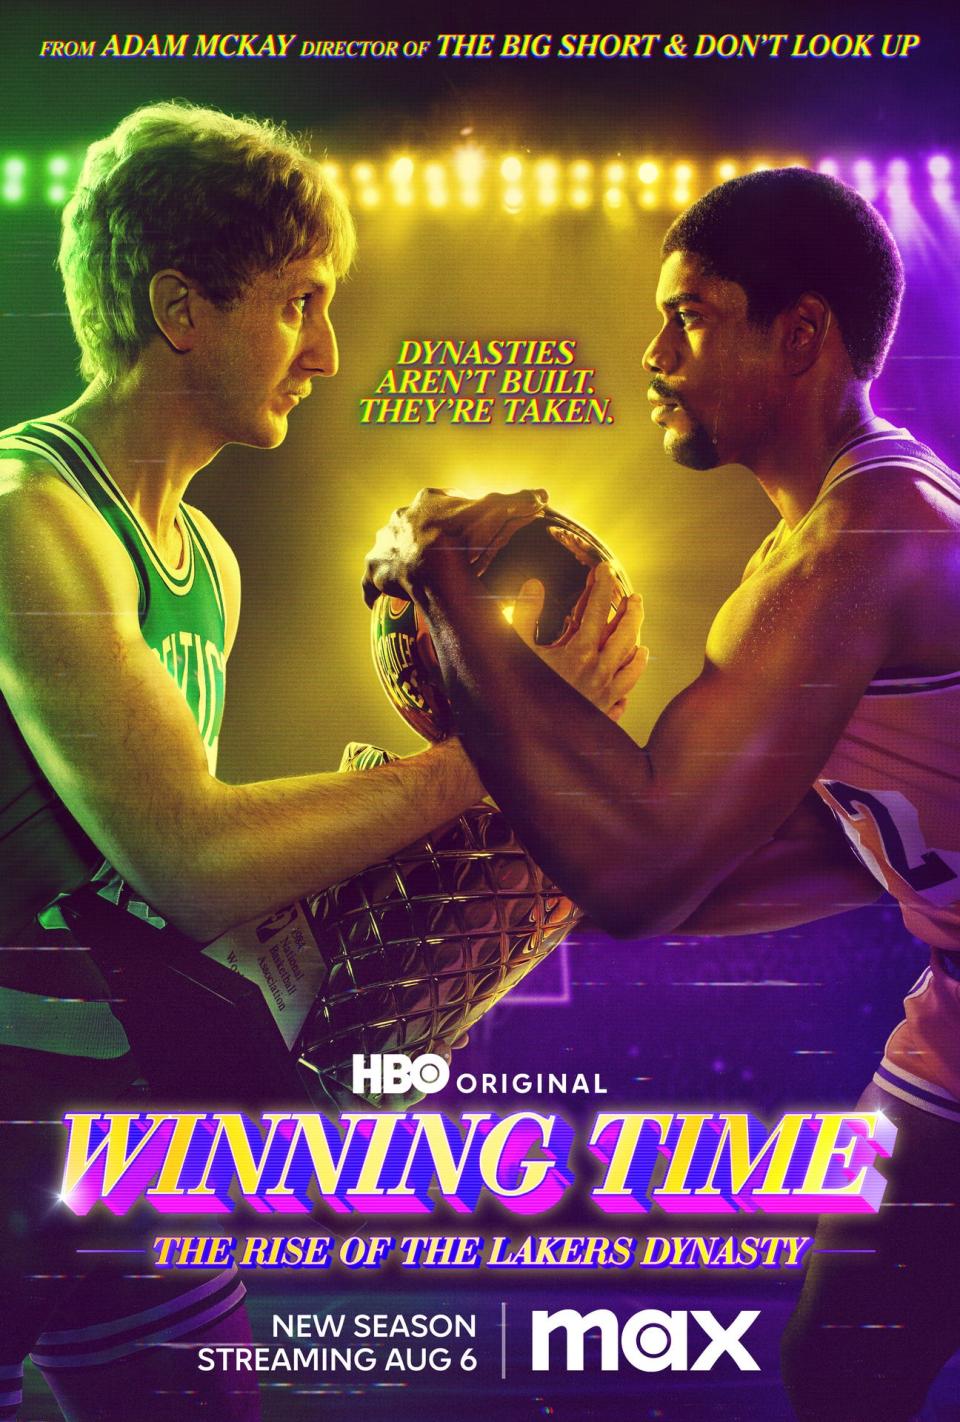 Larry Bird (Sean Patrick Small) shares the "Winning Time" Season 2 poster with Magic Johnson (Quincy Isaiah).